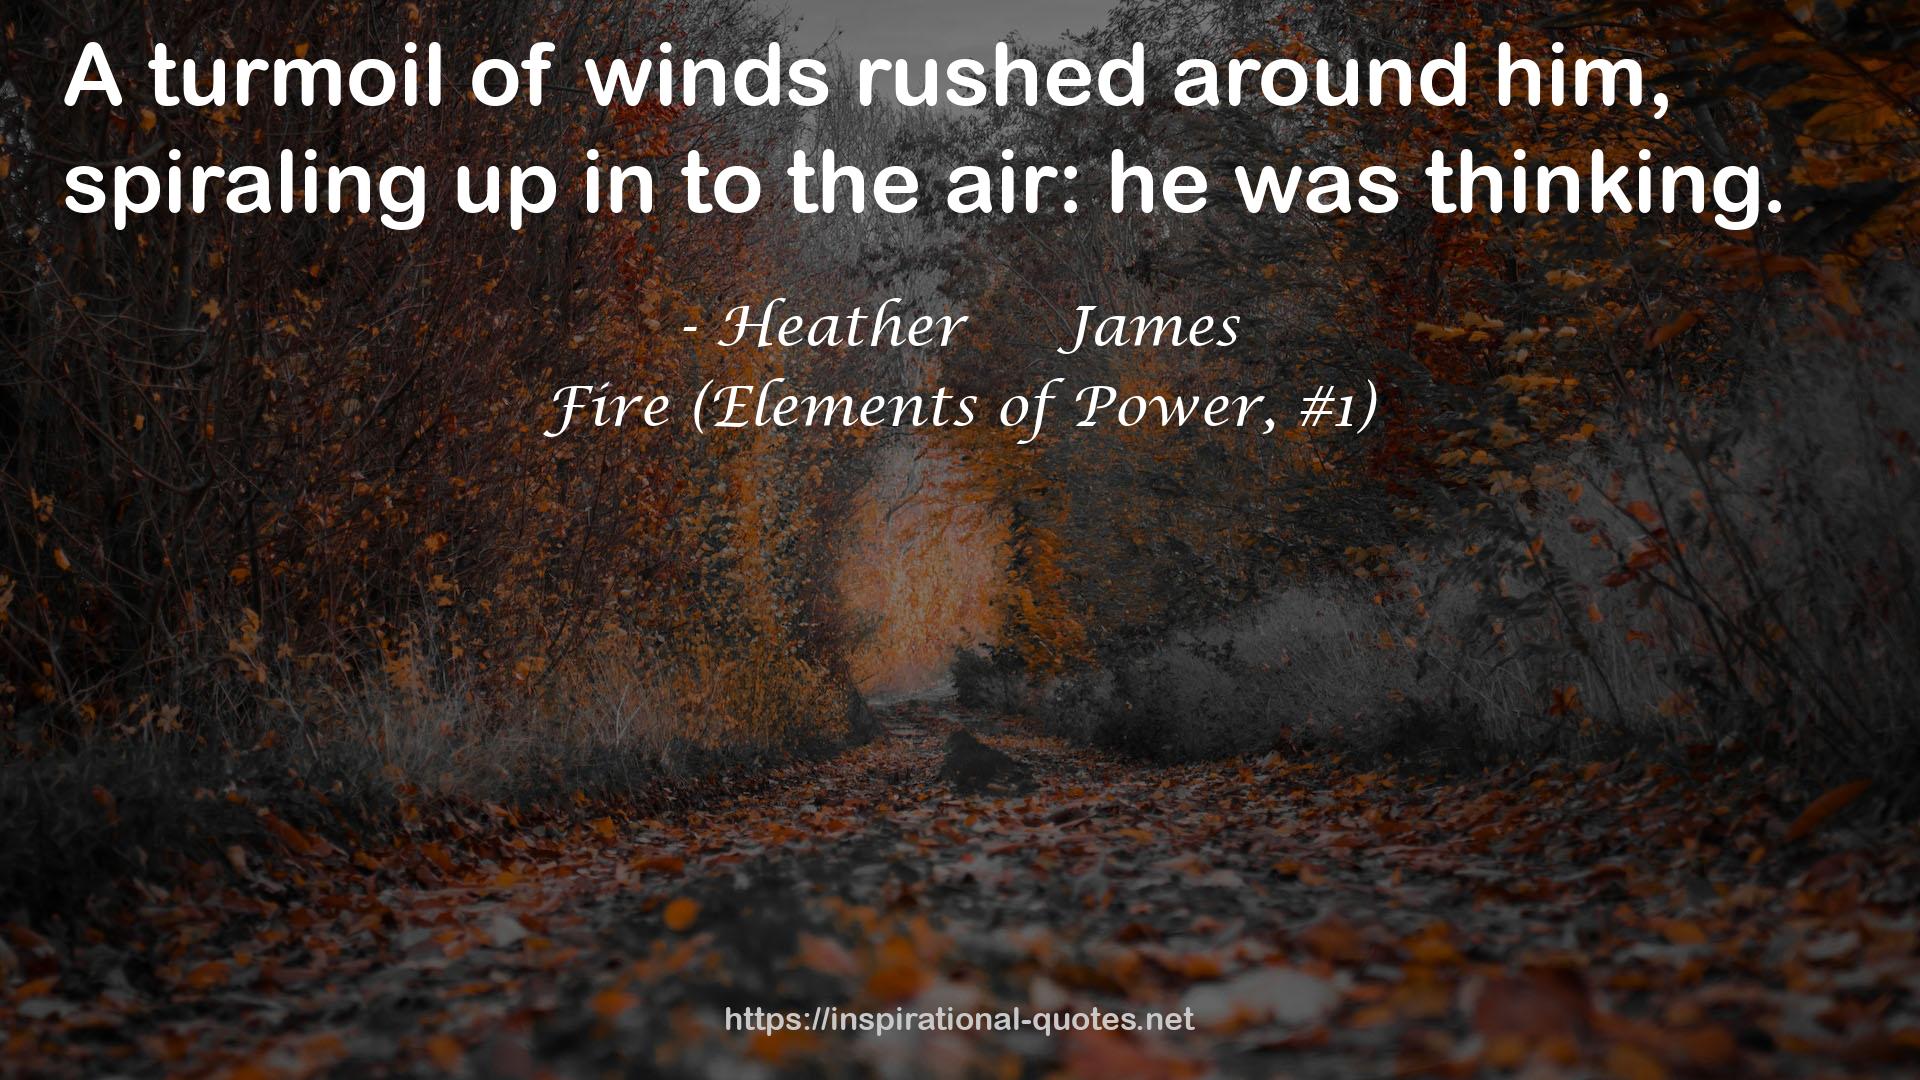 Fire (Elements of Power, #1) QUOTES